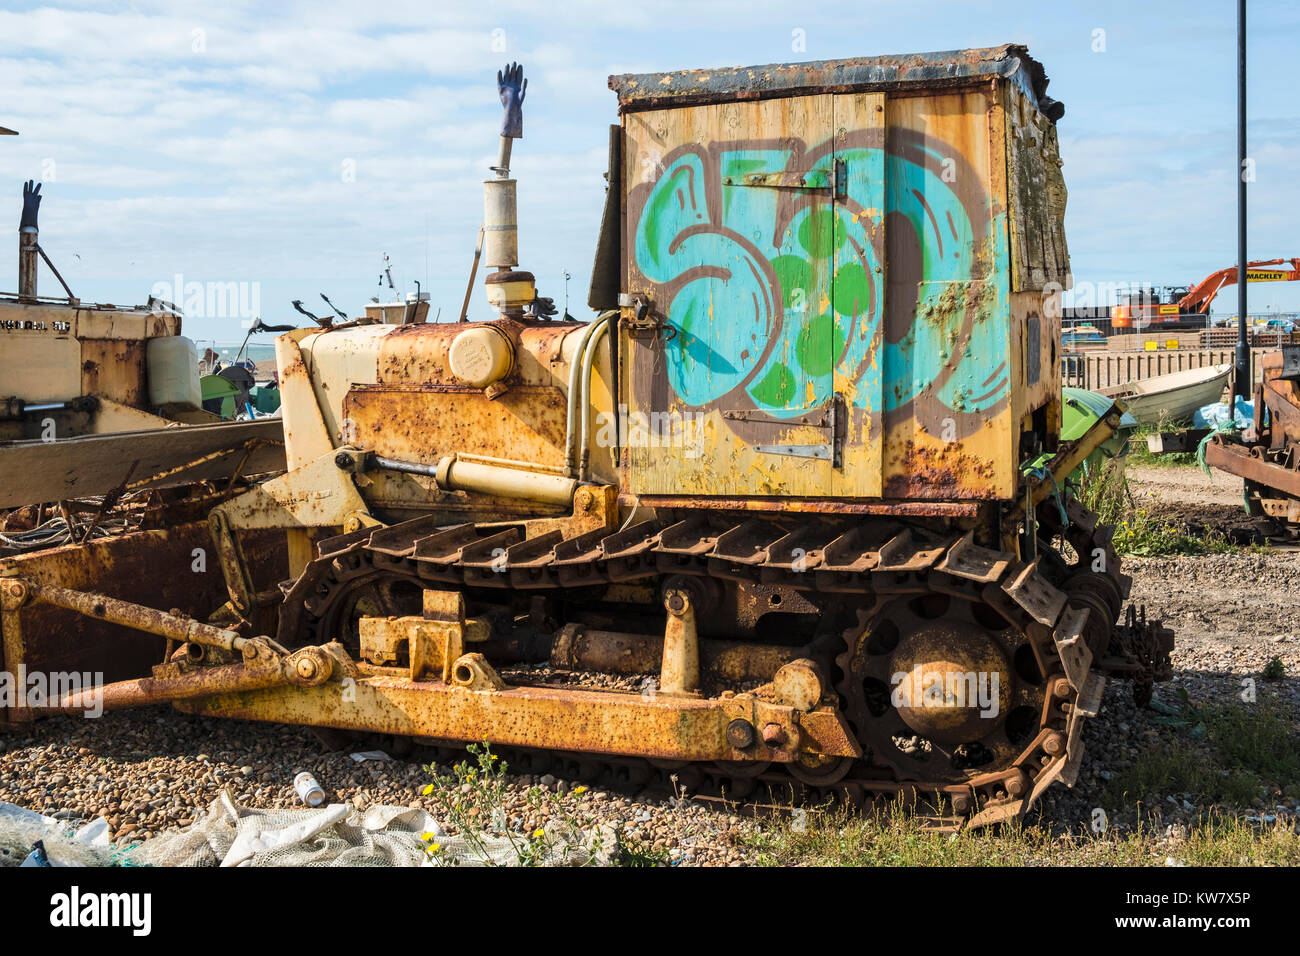 Rusty old beach bulldozer with graffiti on Hastings fishermens beach, the Stade, East Sussex, UK Stock Photo